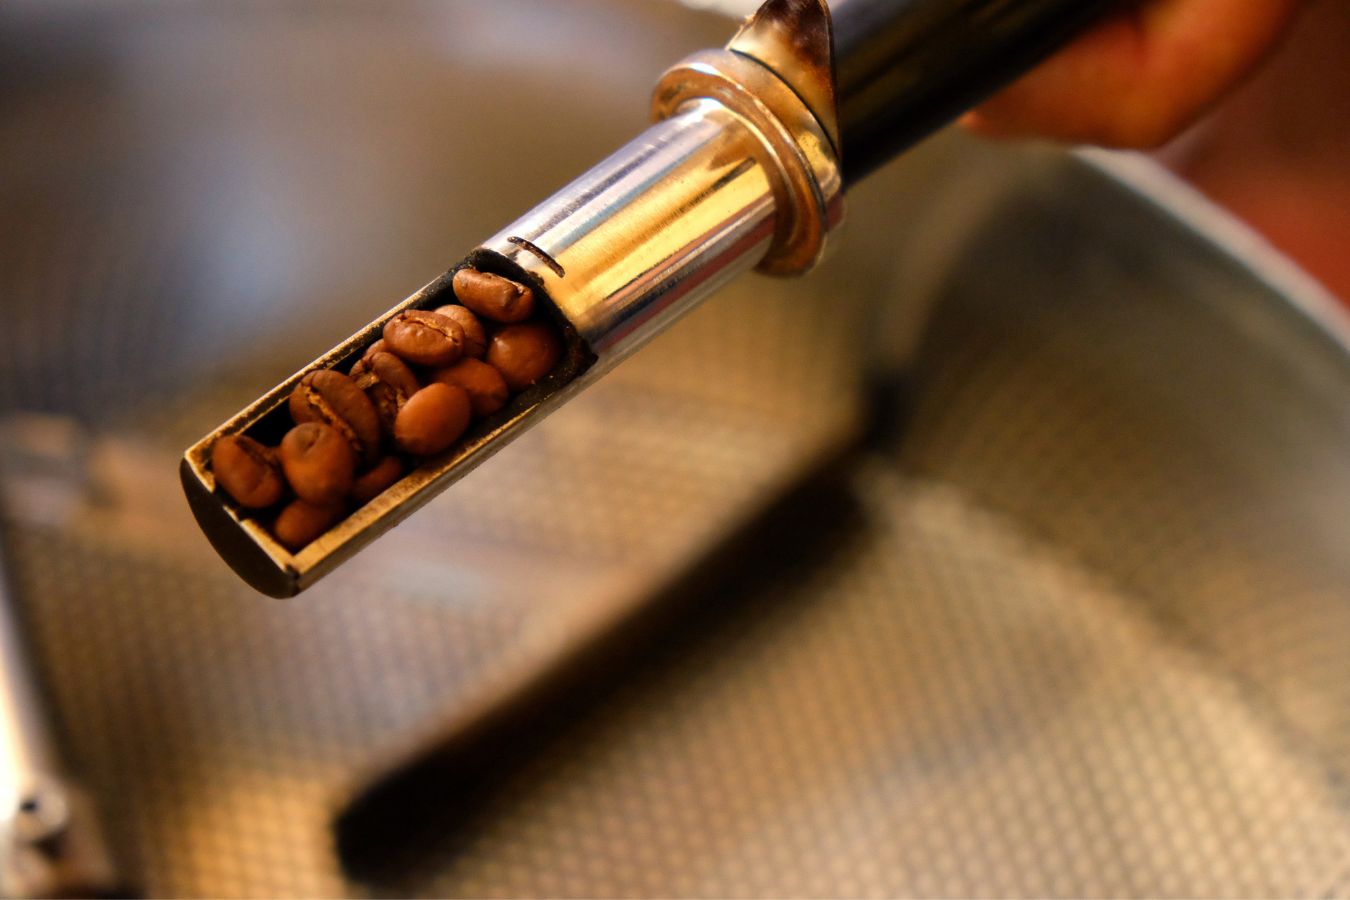 Roasting Levels Affect the Coffee Taste